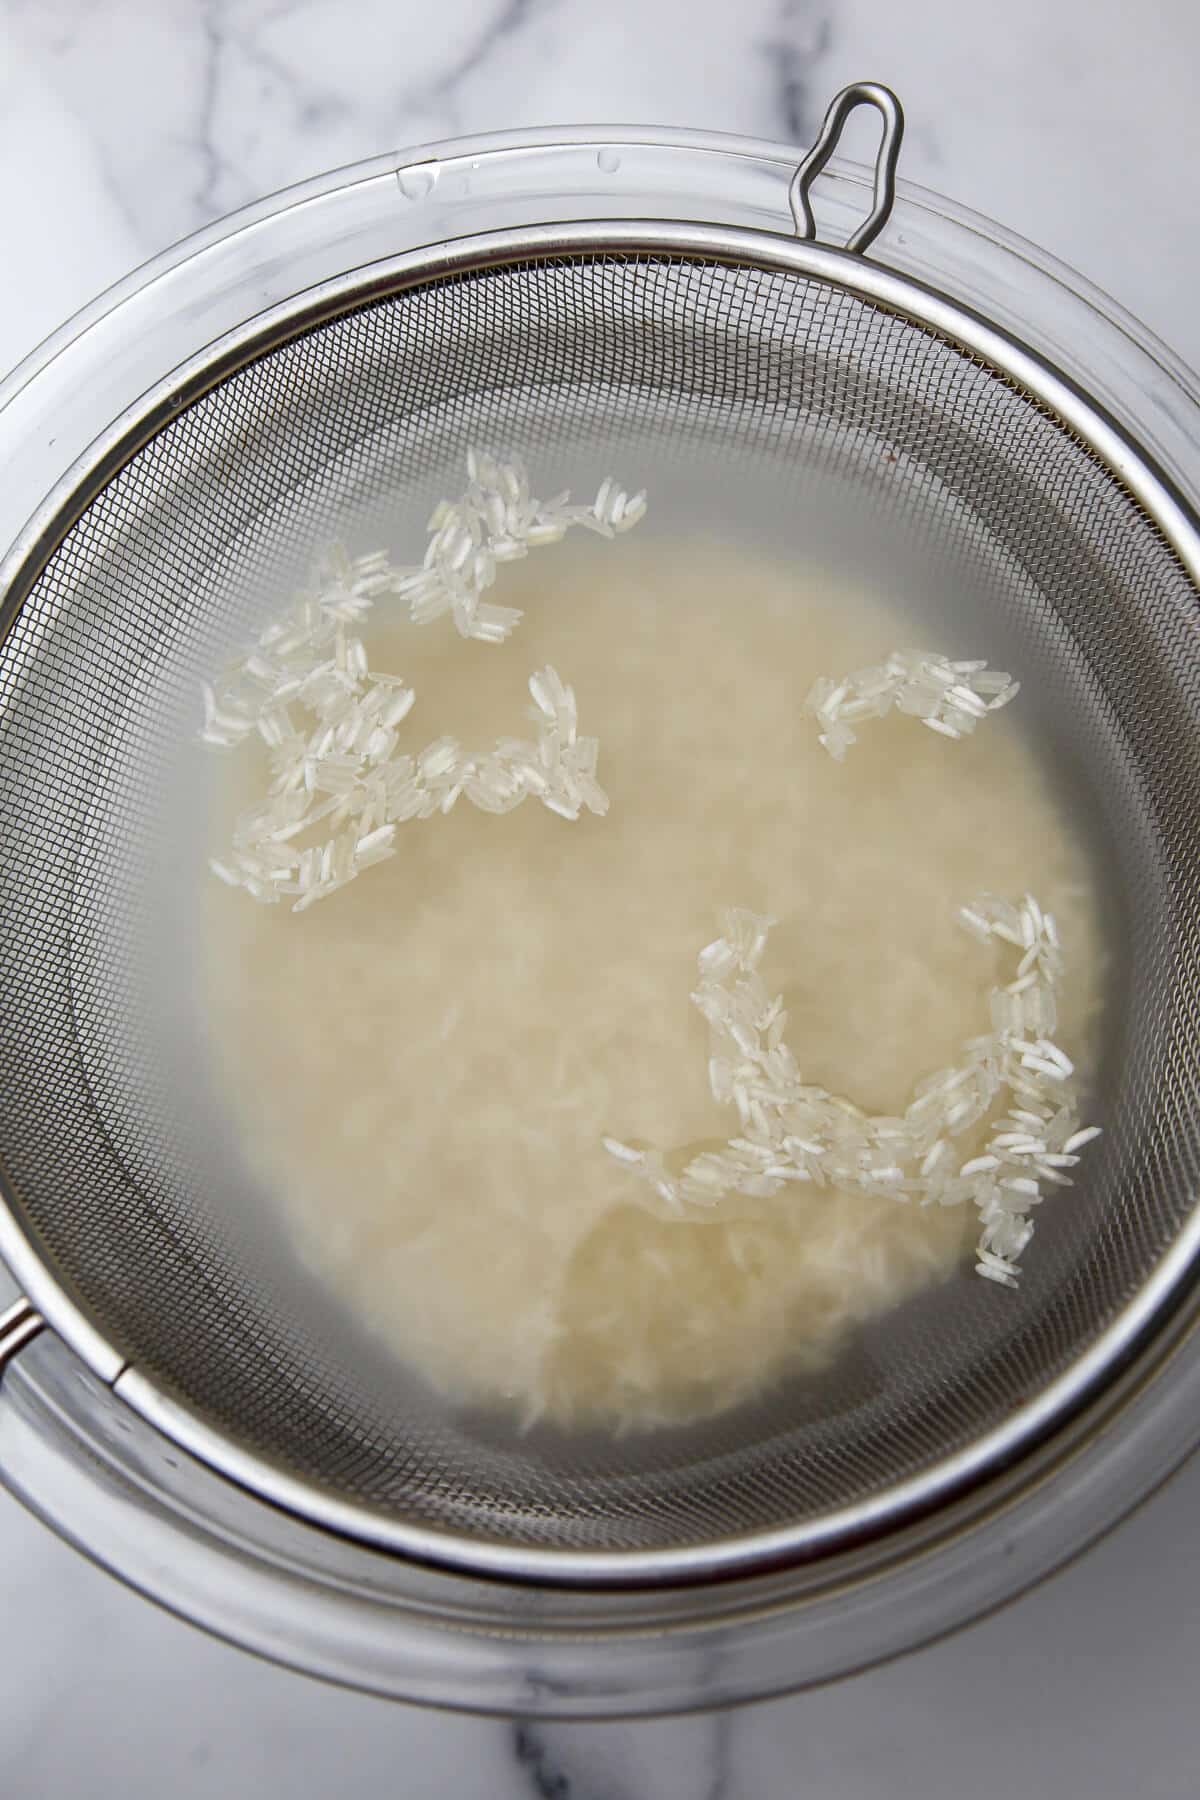 Basmati rice being washed in a mesh strainer.